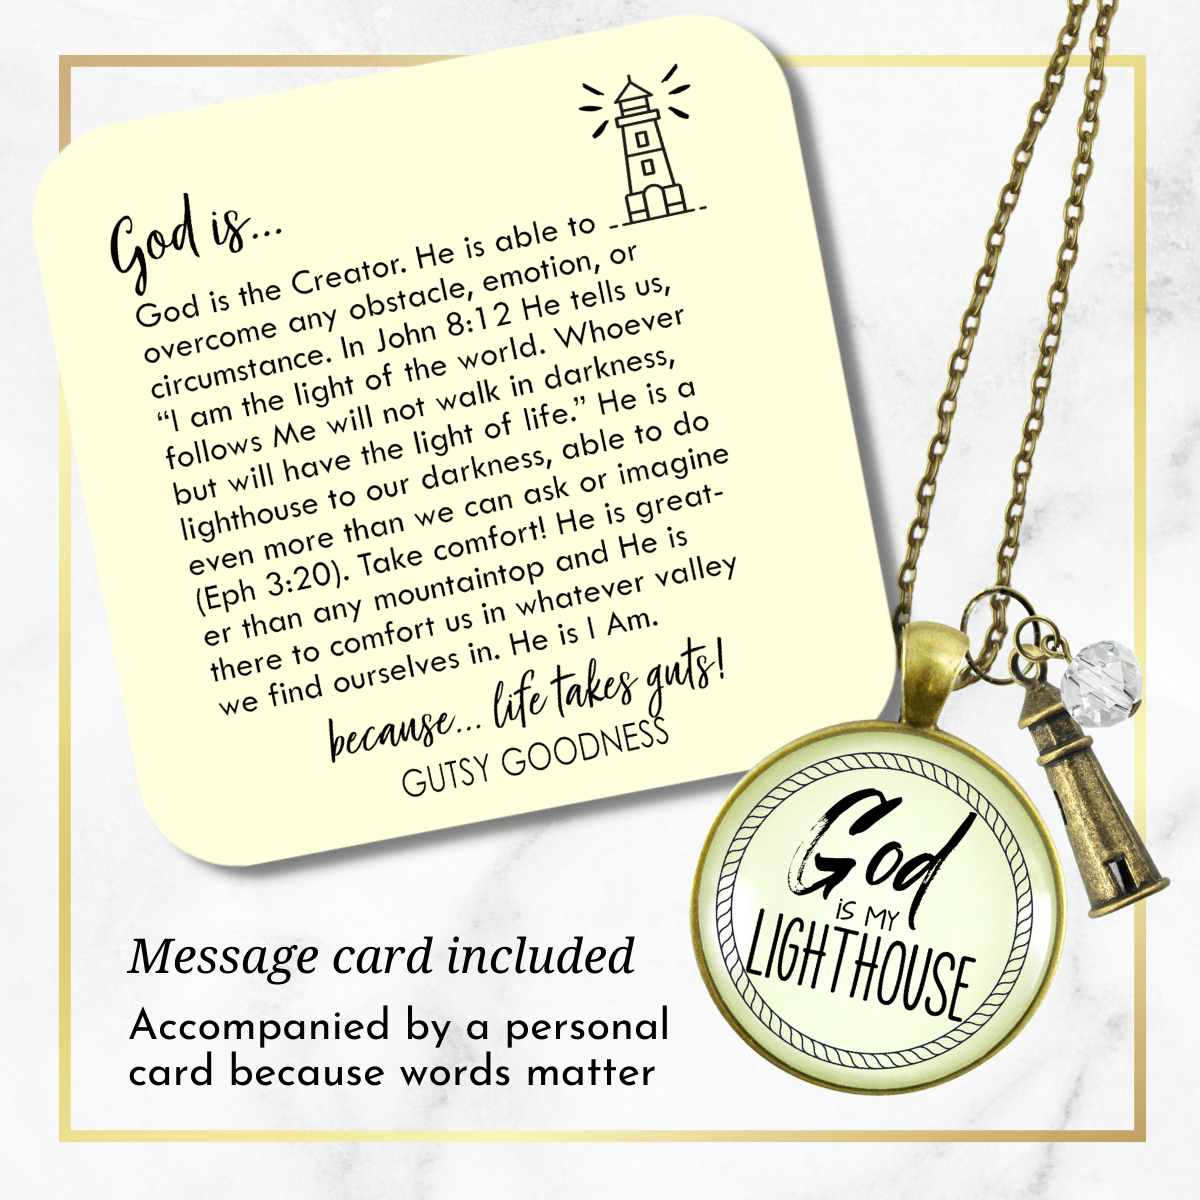 Gutsy Goodness God is My Lighthouse Necklace Faith Nautical Womens Christian Jewelry - Gutsy Goodness;God Is My Lighthouse Necklace Faith Nautical Womens Christian Jewelry - Gutsy Goodness Handmade Jewelry Gifts